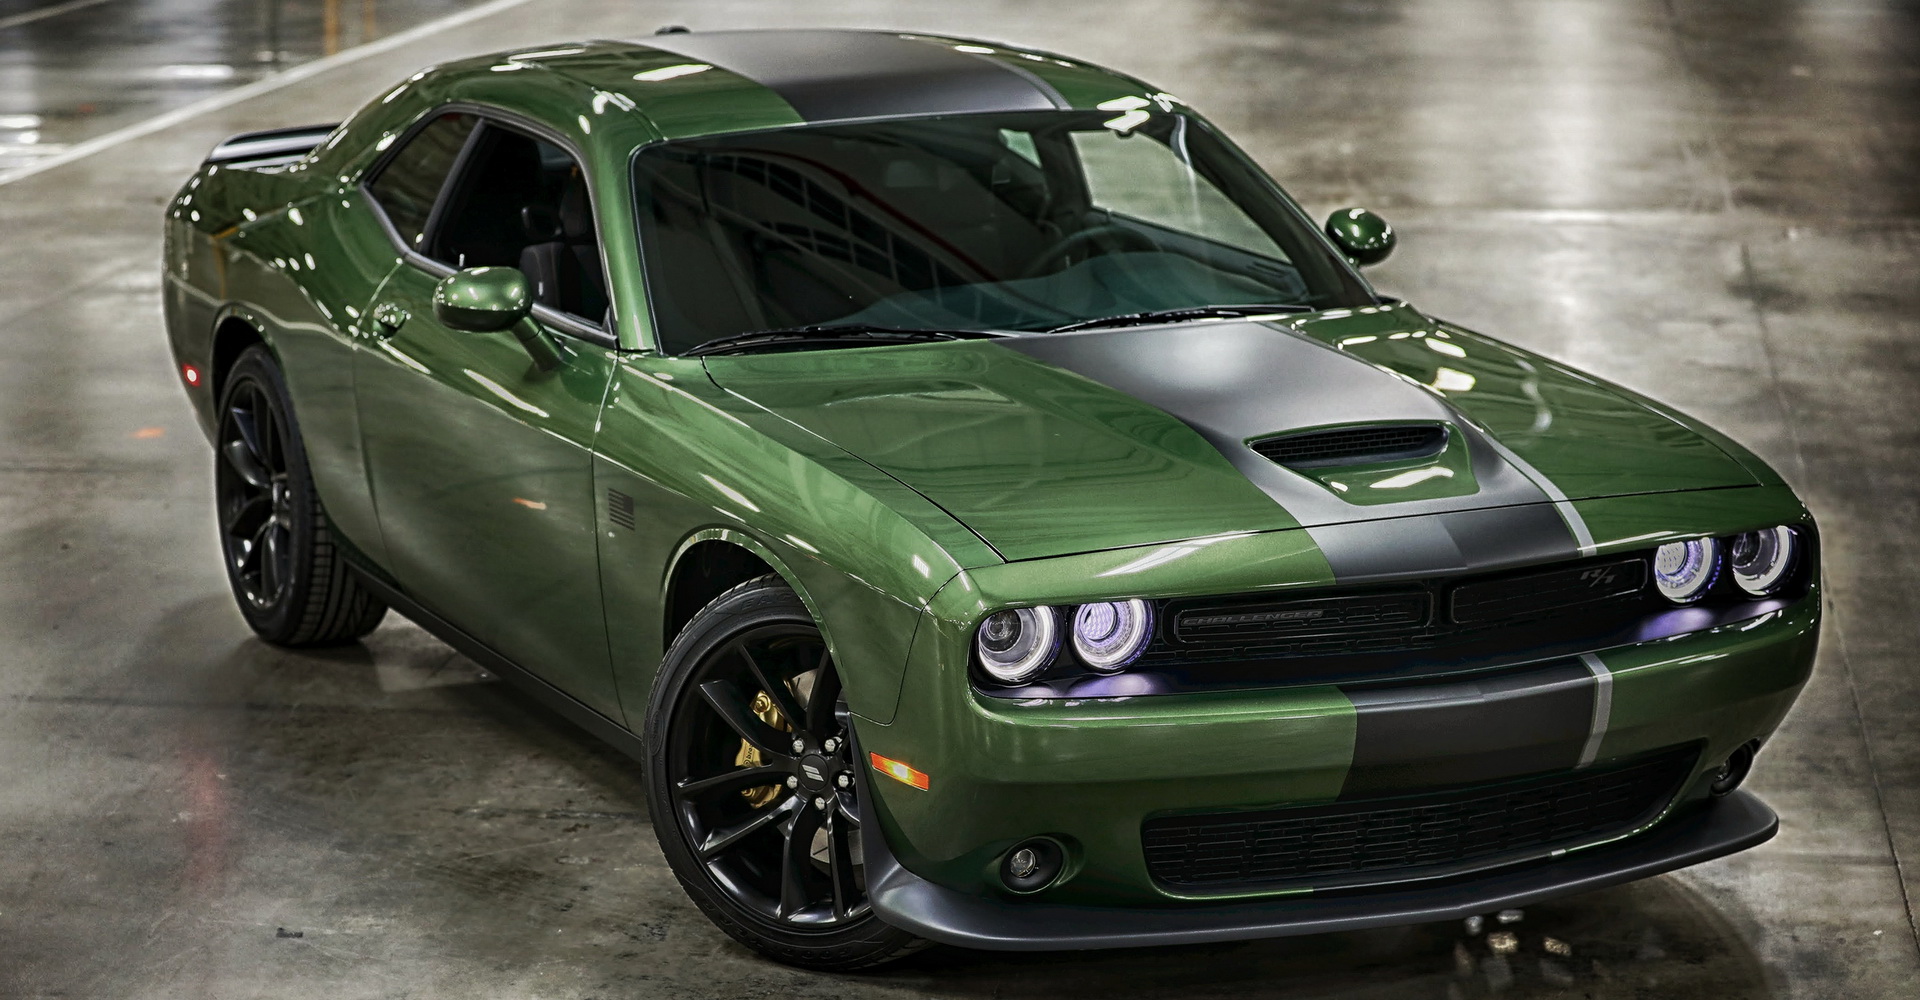 Dodge Challenger and Charger Stars & Stripes Editions are made for 'Murica